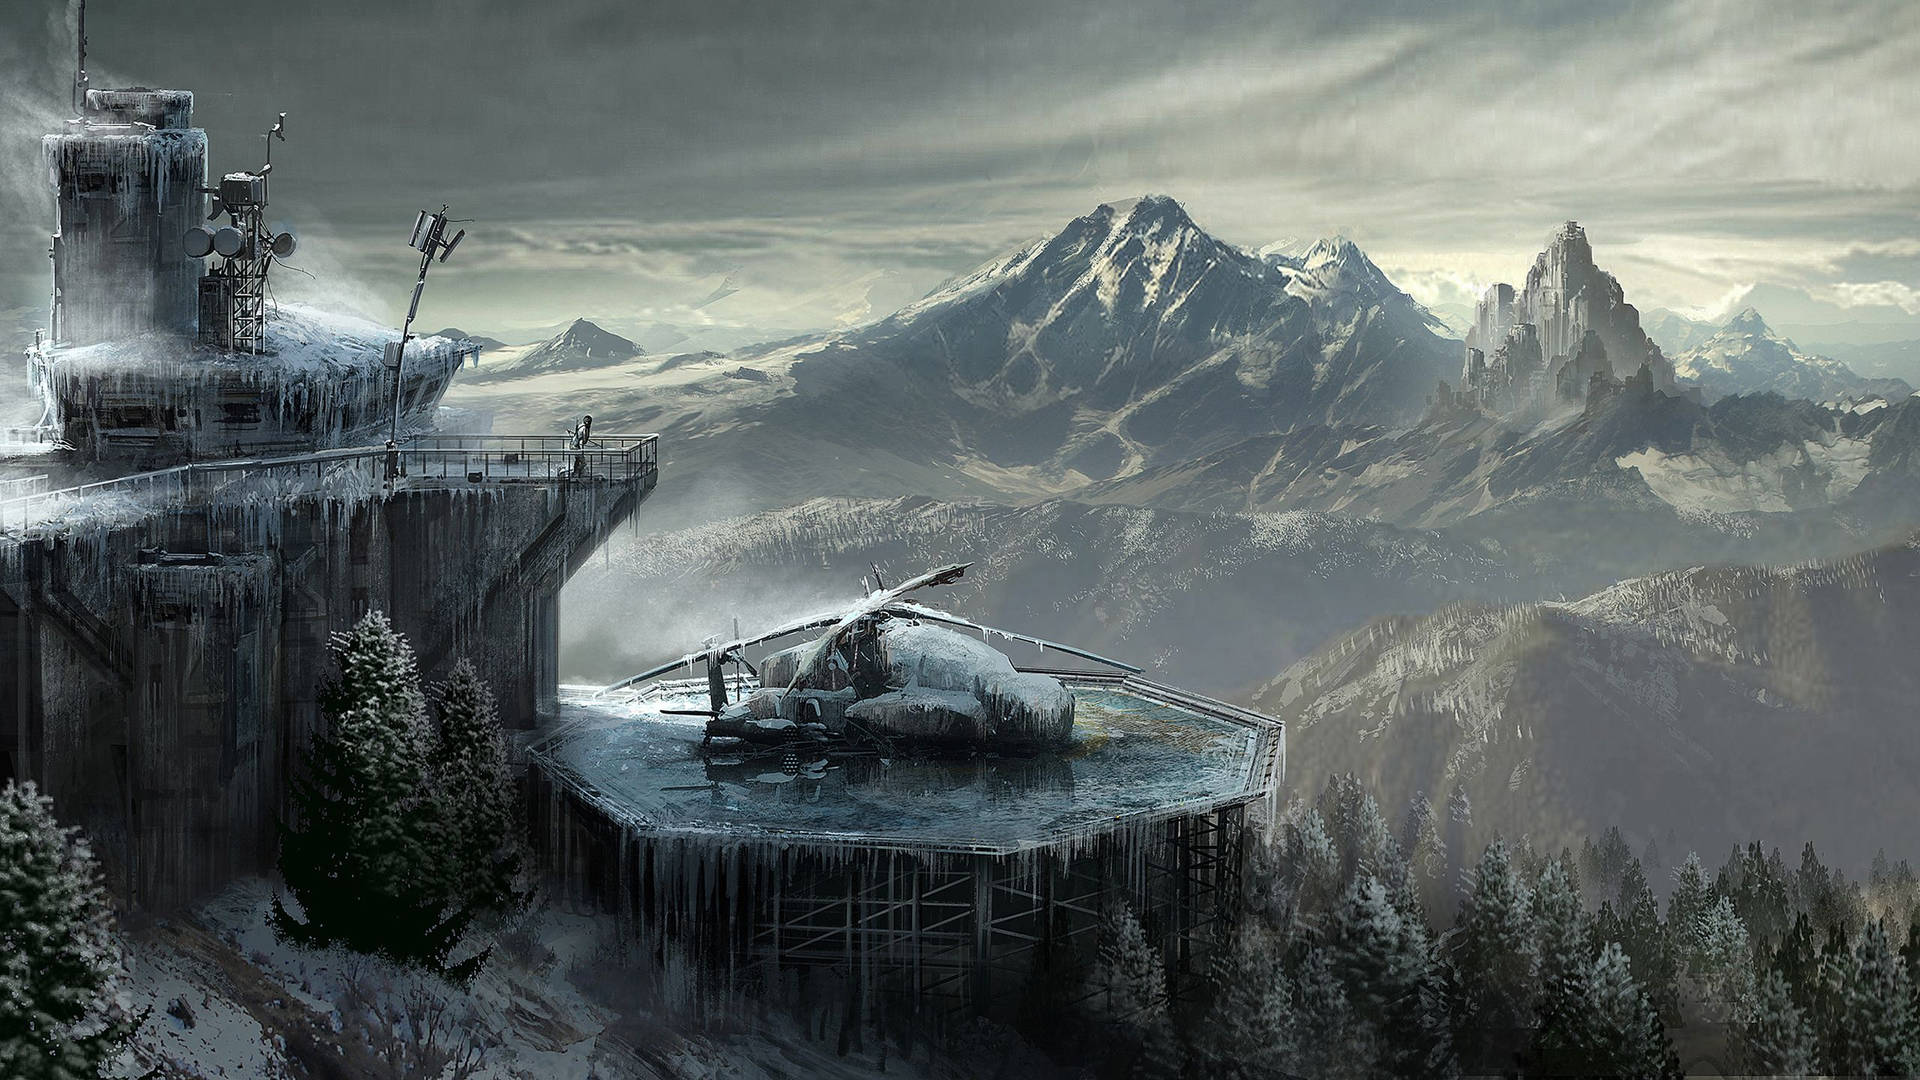 Free Tomb Raider Wallpaper Downloads, [200+] Tomb Raider Wallpapers for  FREE 